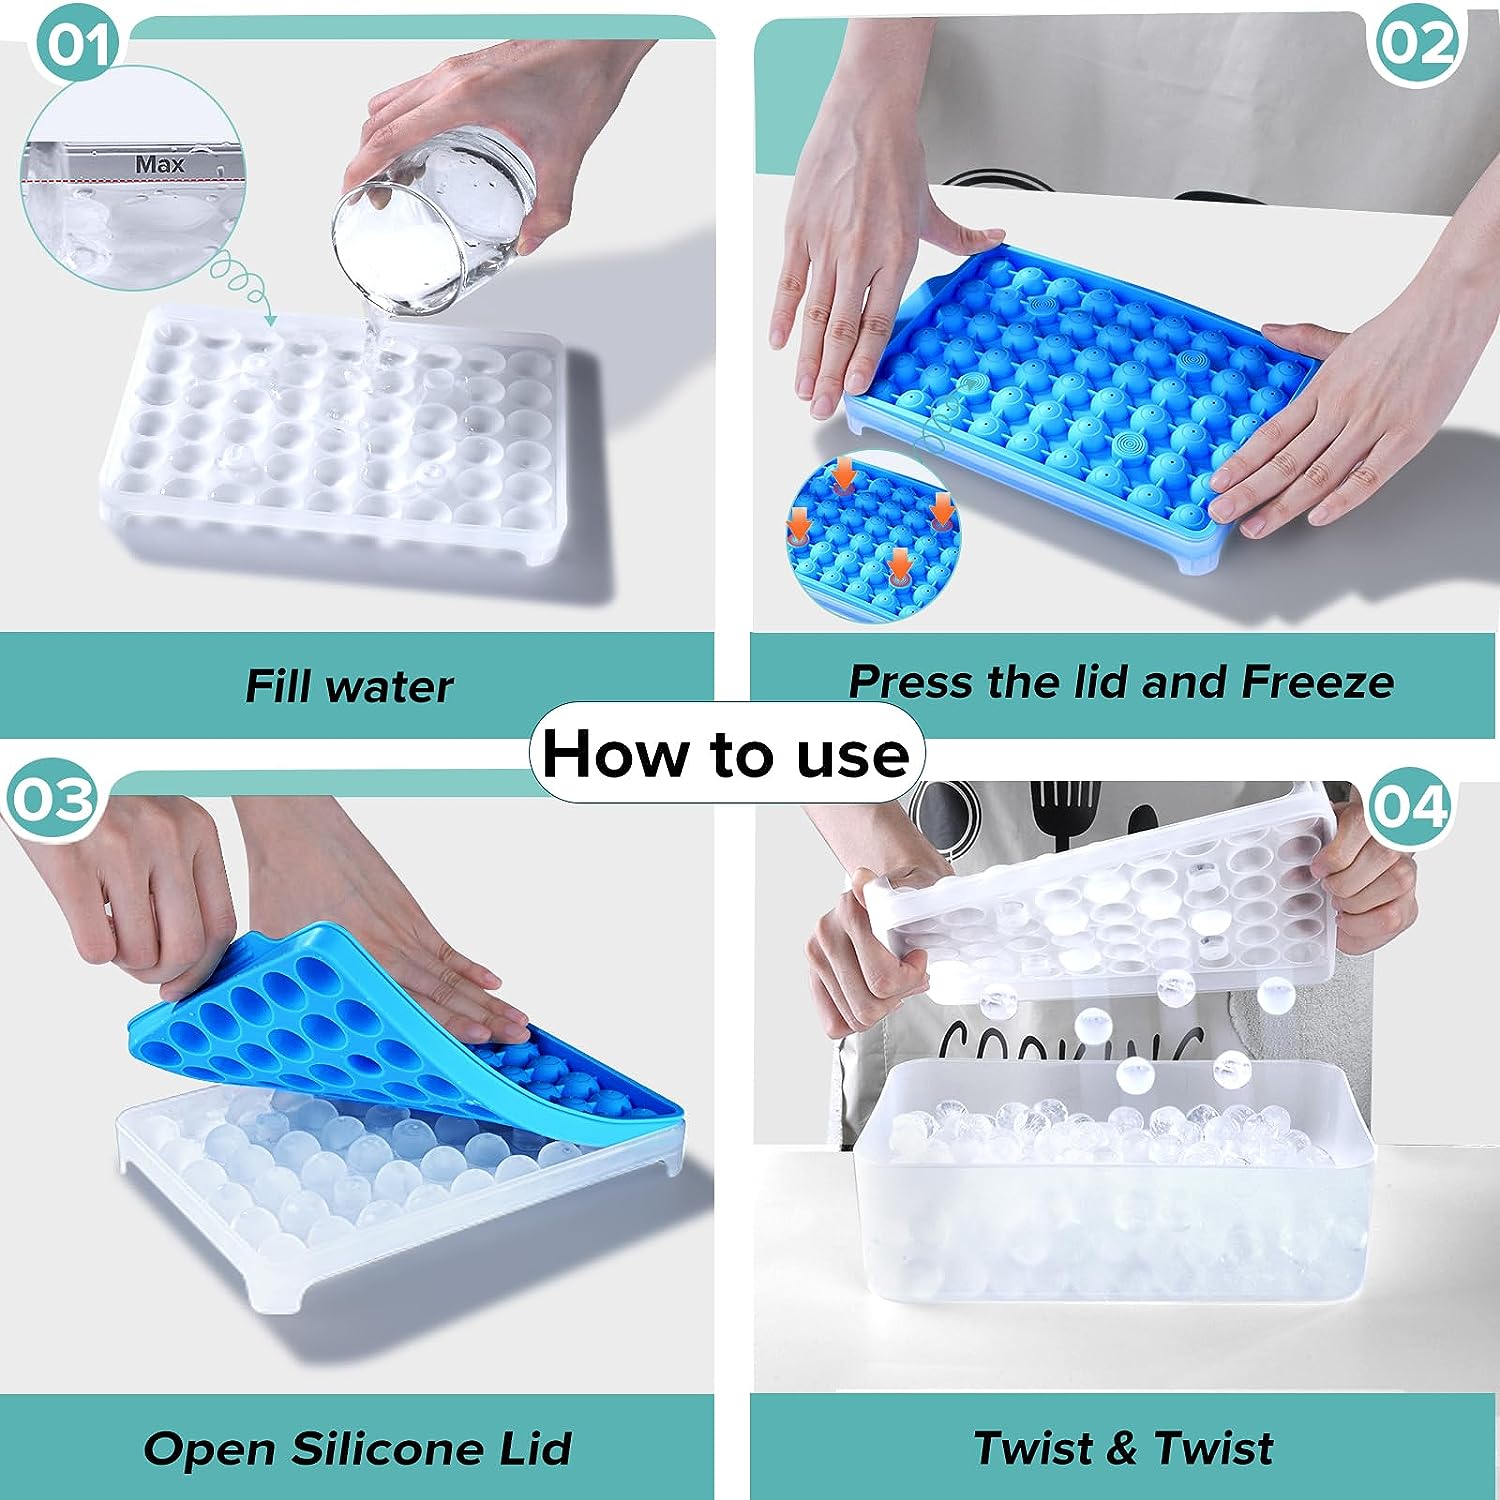 longzon Mini Round Ice Cube Tray with Lid and Bin,3 pack Silicone Ice Cube Trays for Freezer